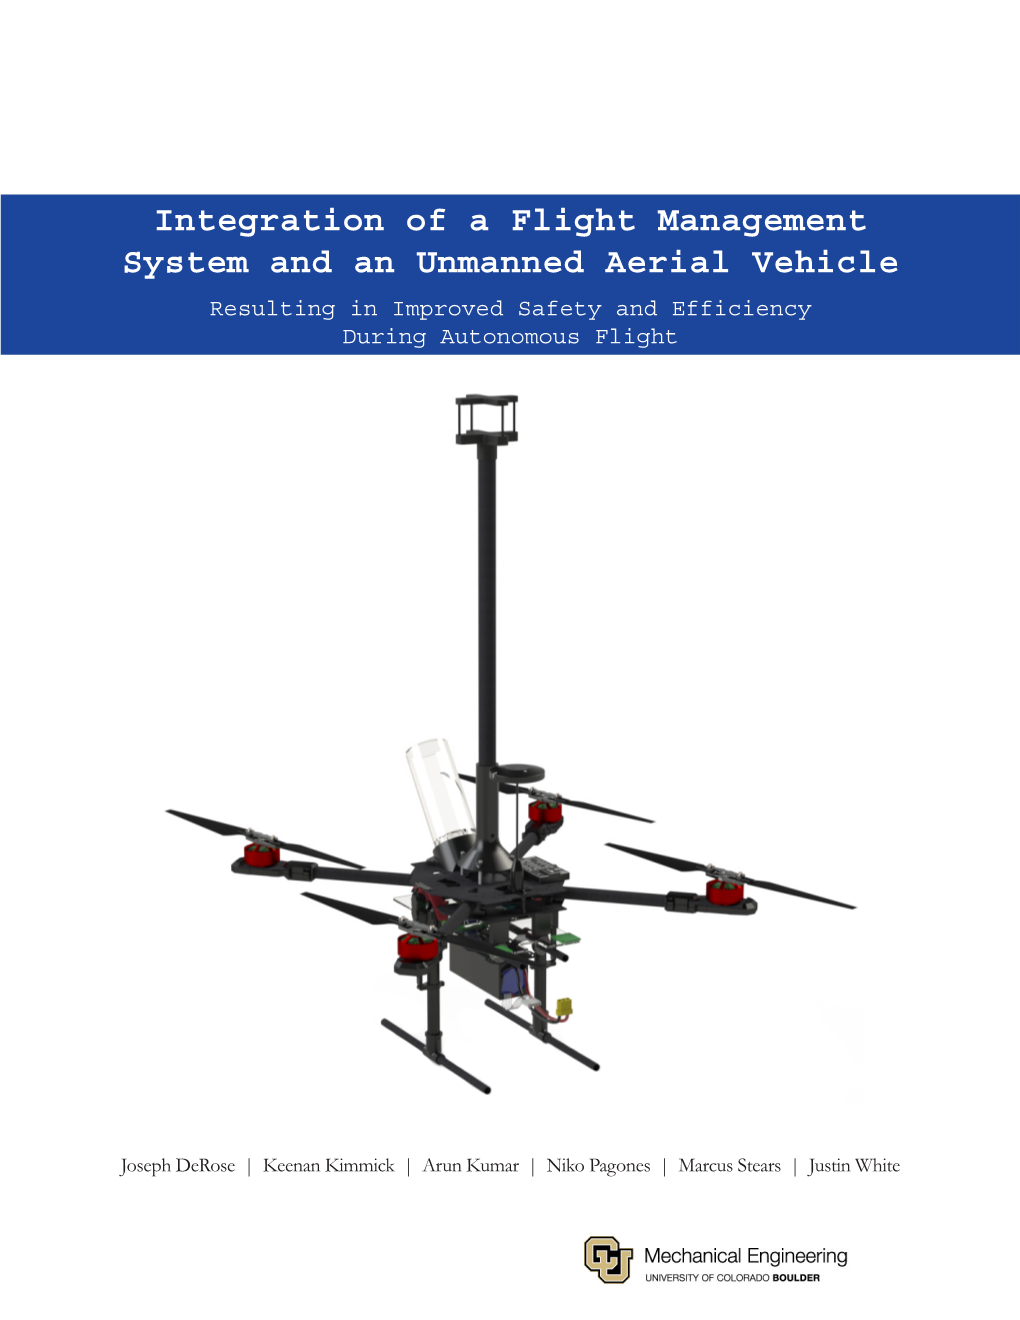 Integration of a Flight Management System and an Unmanned Aerial Vehicle Resulting in Improved Safety and Efficiency During Autonomous Flight